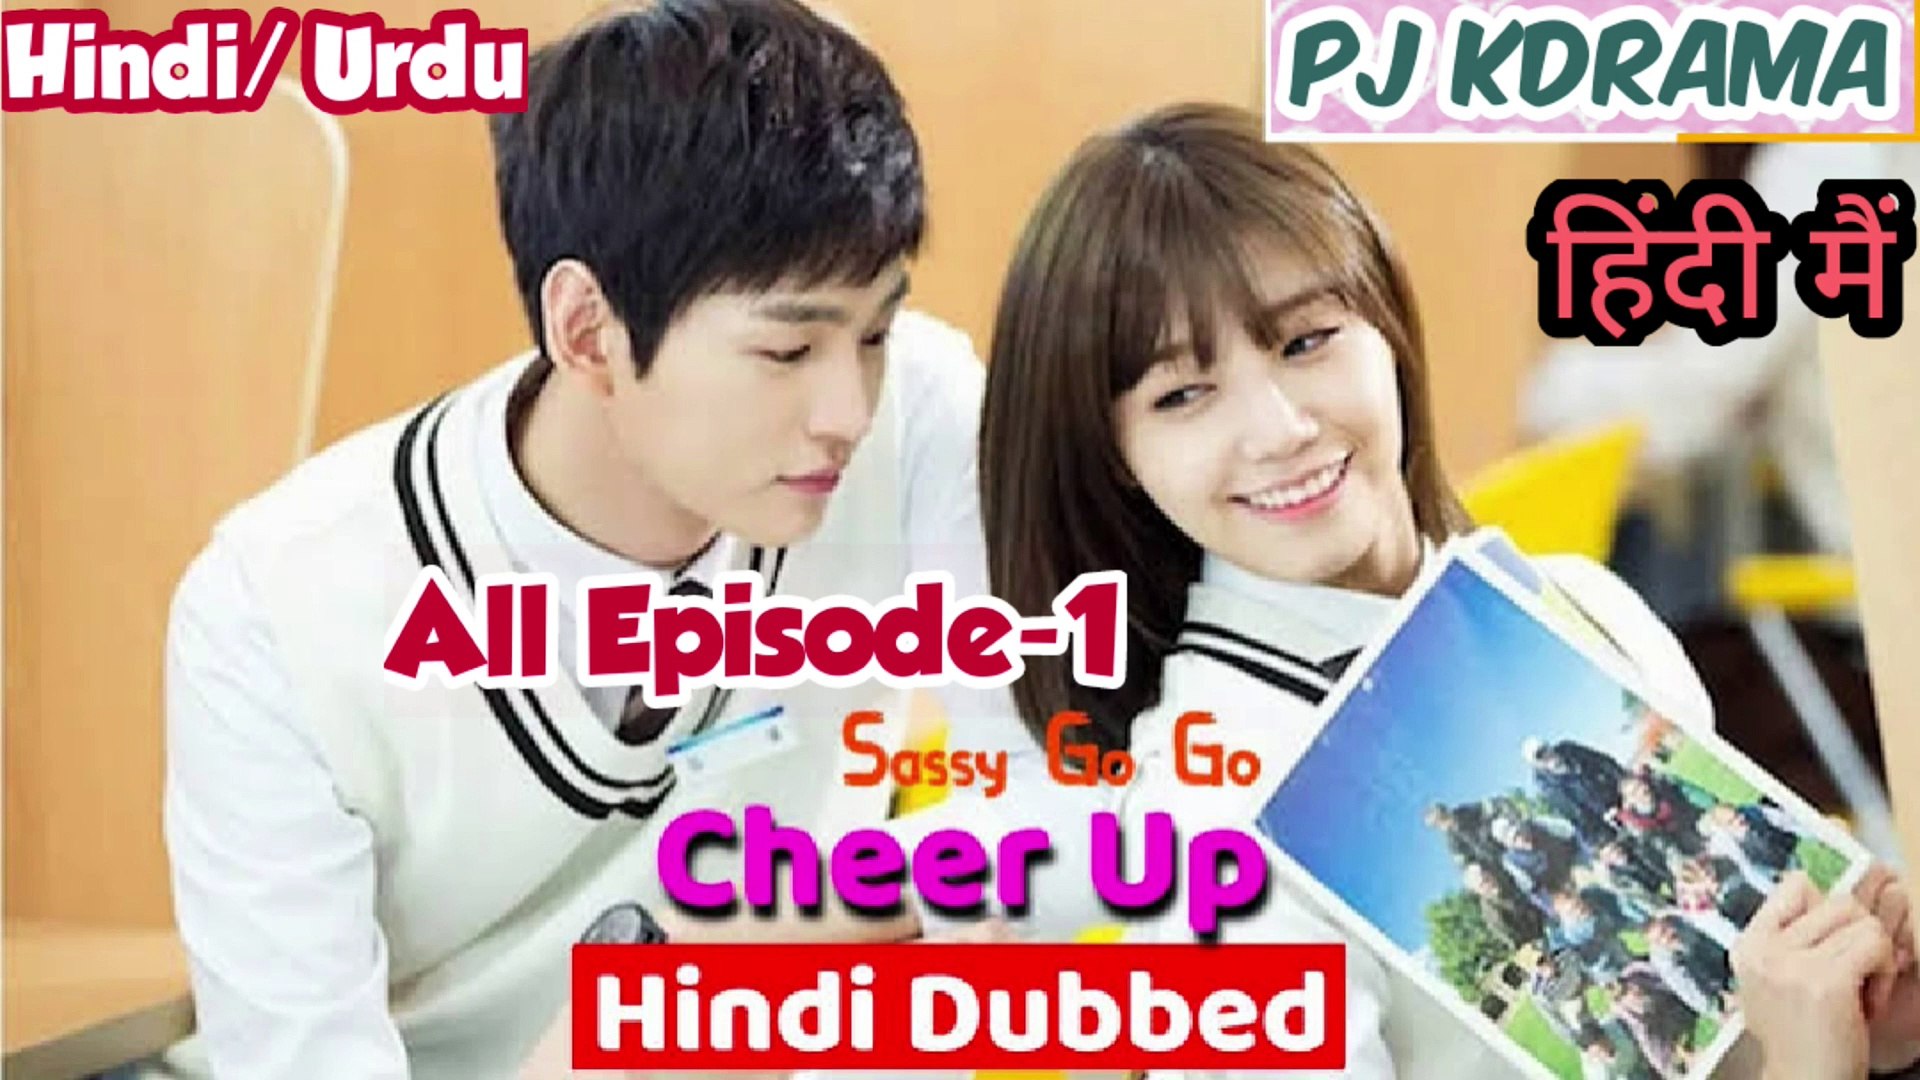 Cheer Up Full Episode -1 (Hindiurdu) Dubbed With Eng Sub #Kdrama - Video  Dailymotion